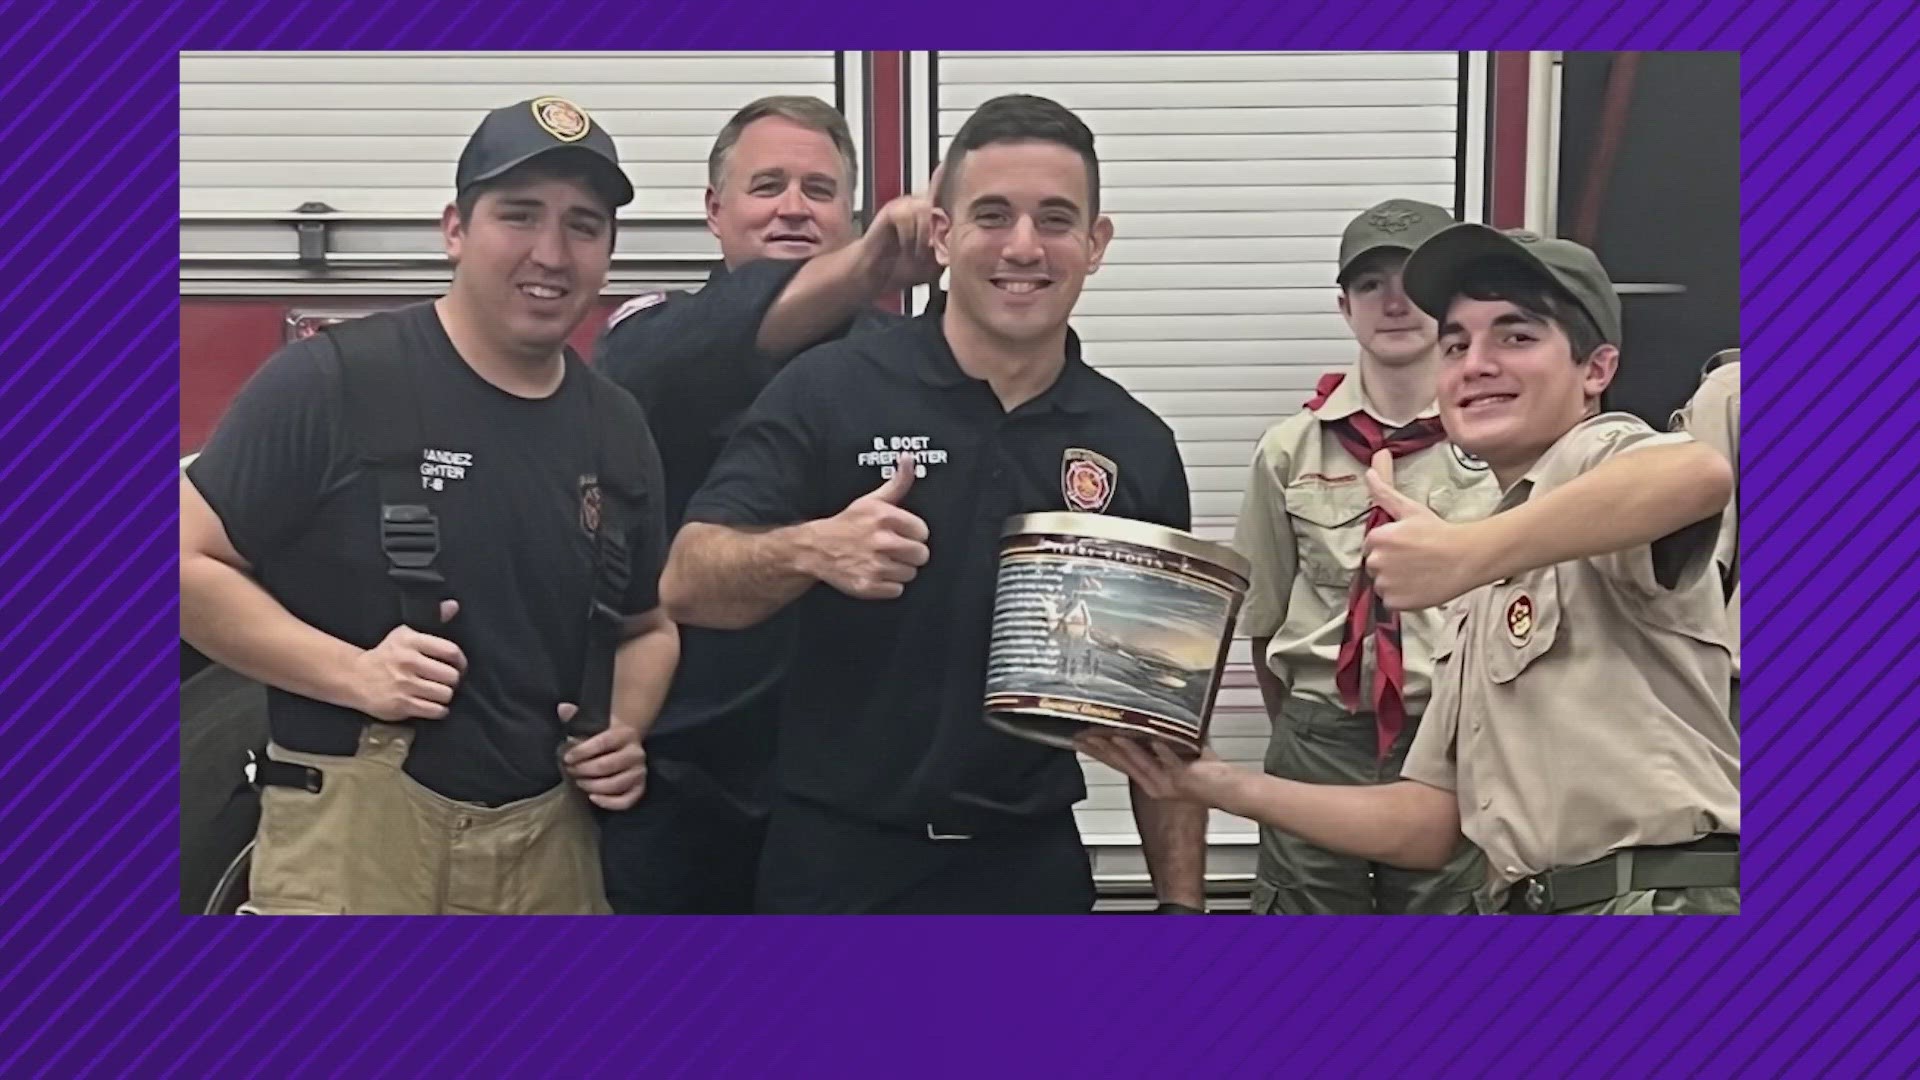 The BSA's popcorn sale is its biggest fundraiser raising money for scouting activities.